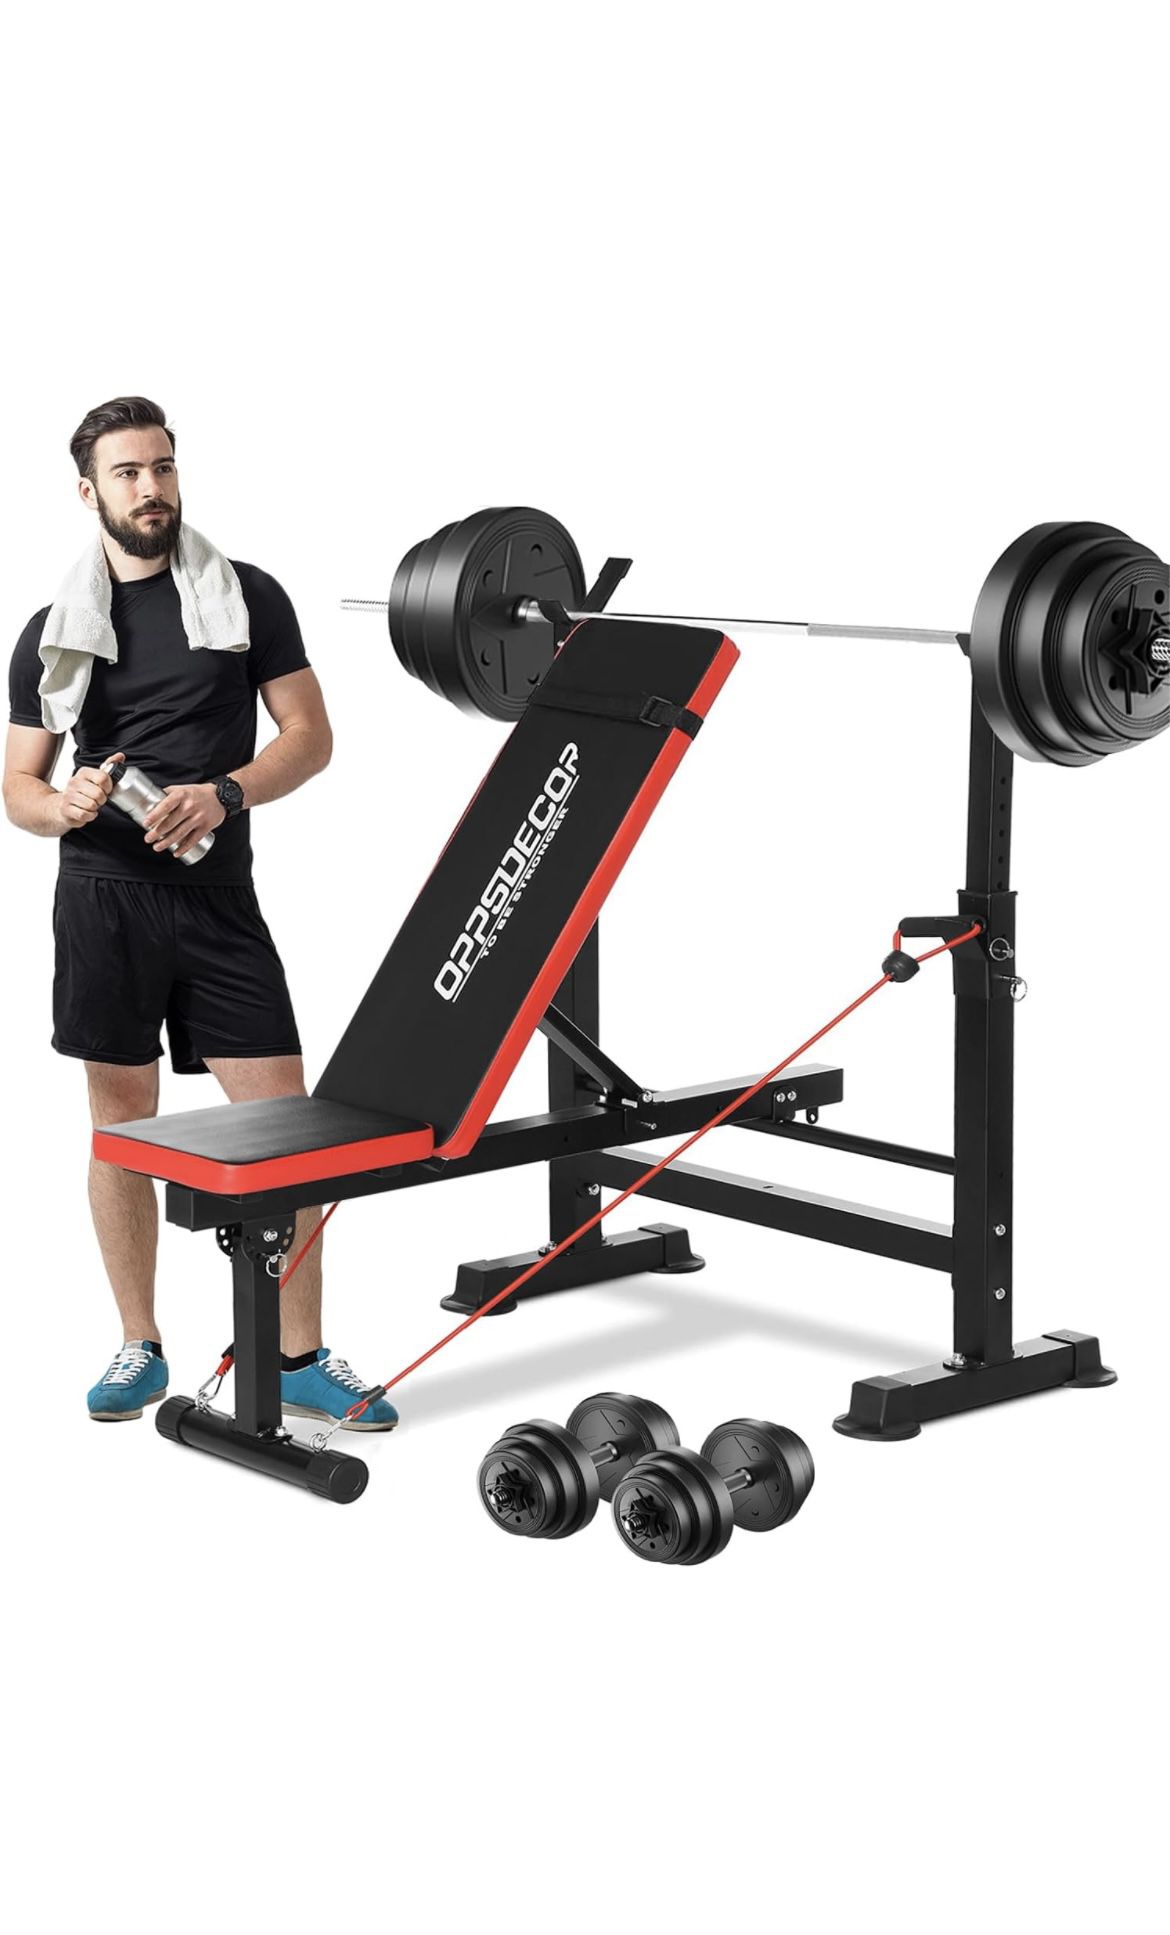 Workout Weight Bench